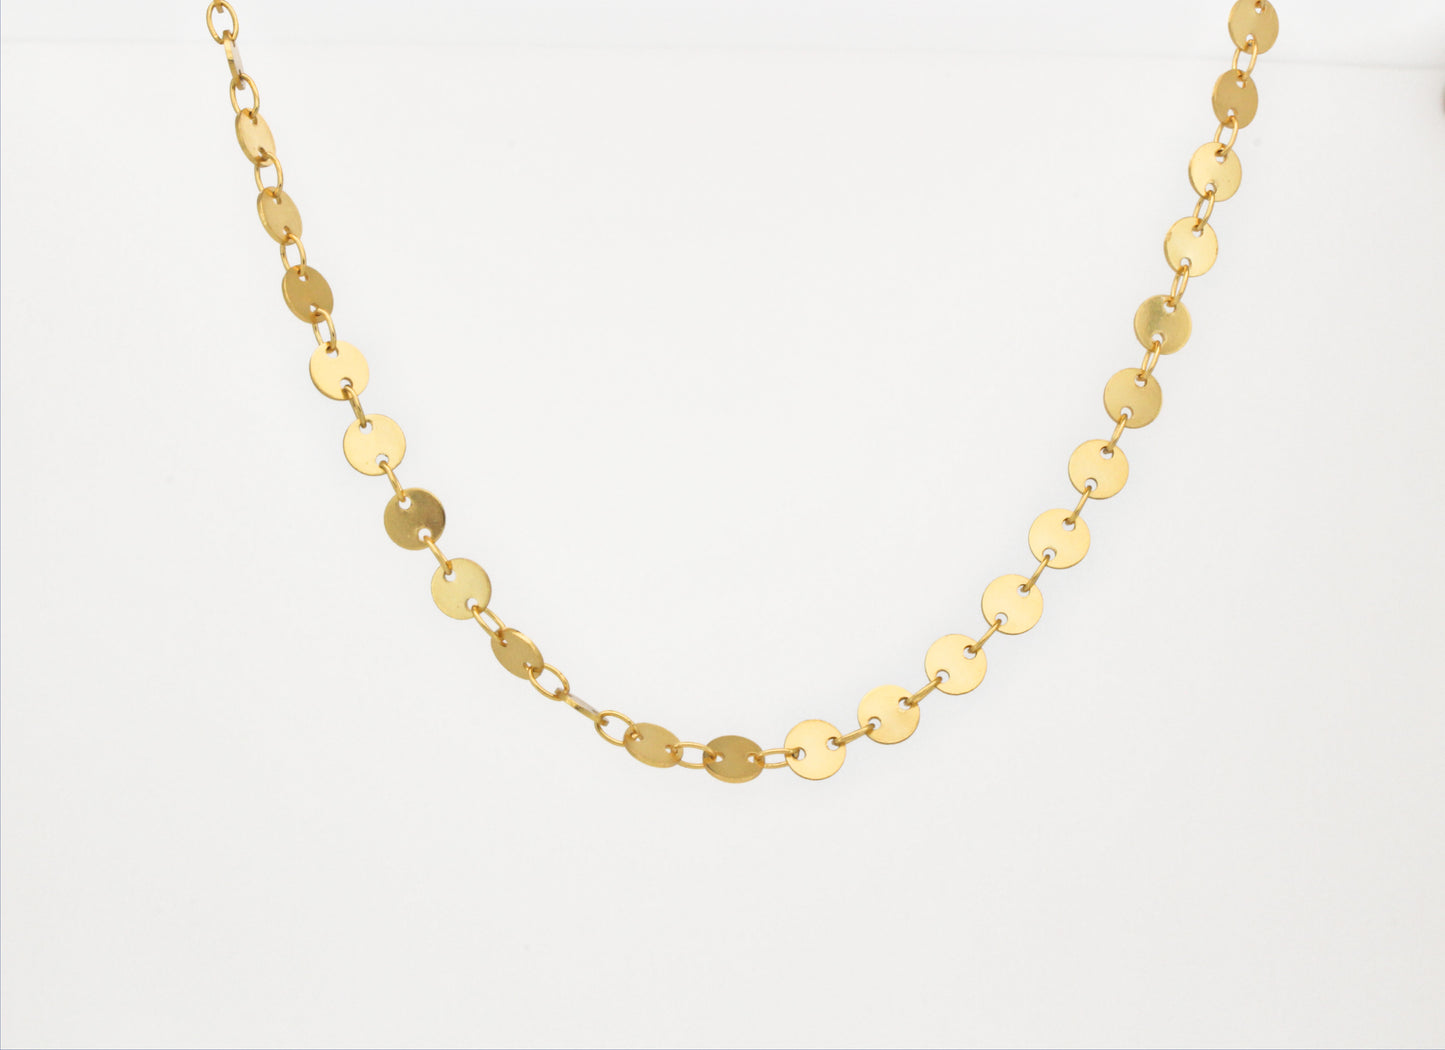 MARGOT - Choker S925 Sterling Necklace ∙ Coin Chain Necklace ∙ Disc Gold Chain ∙ Circle Sequin Chain